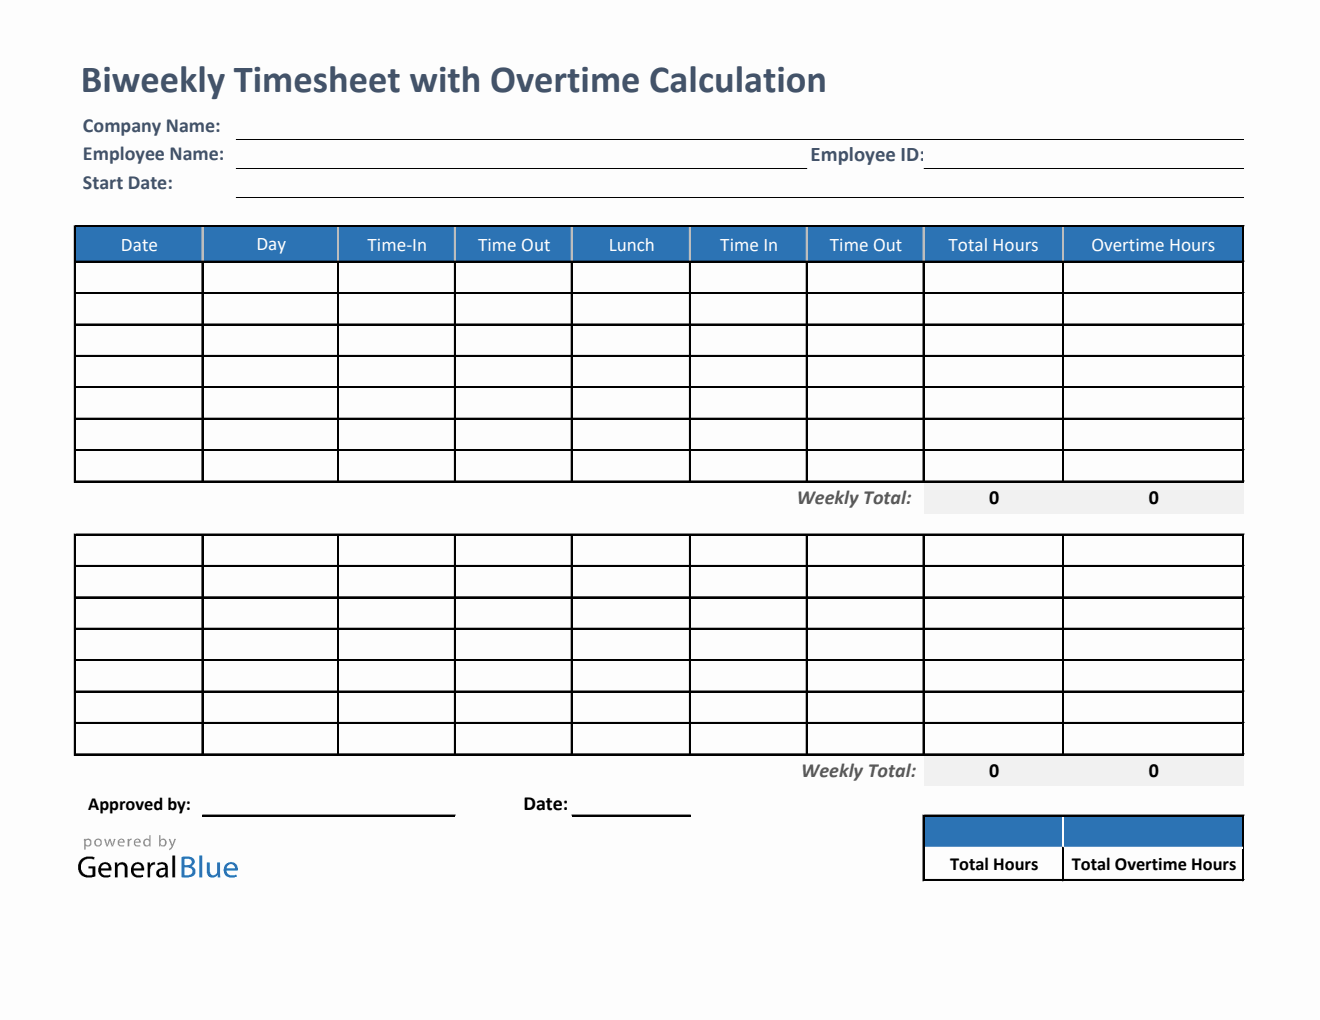 Biweekly Timesheet With Overtime Calculation in Excel